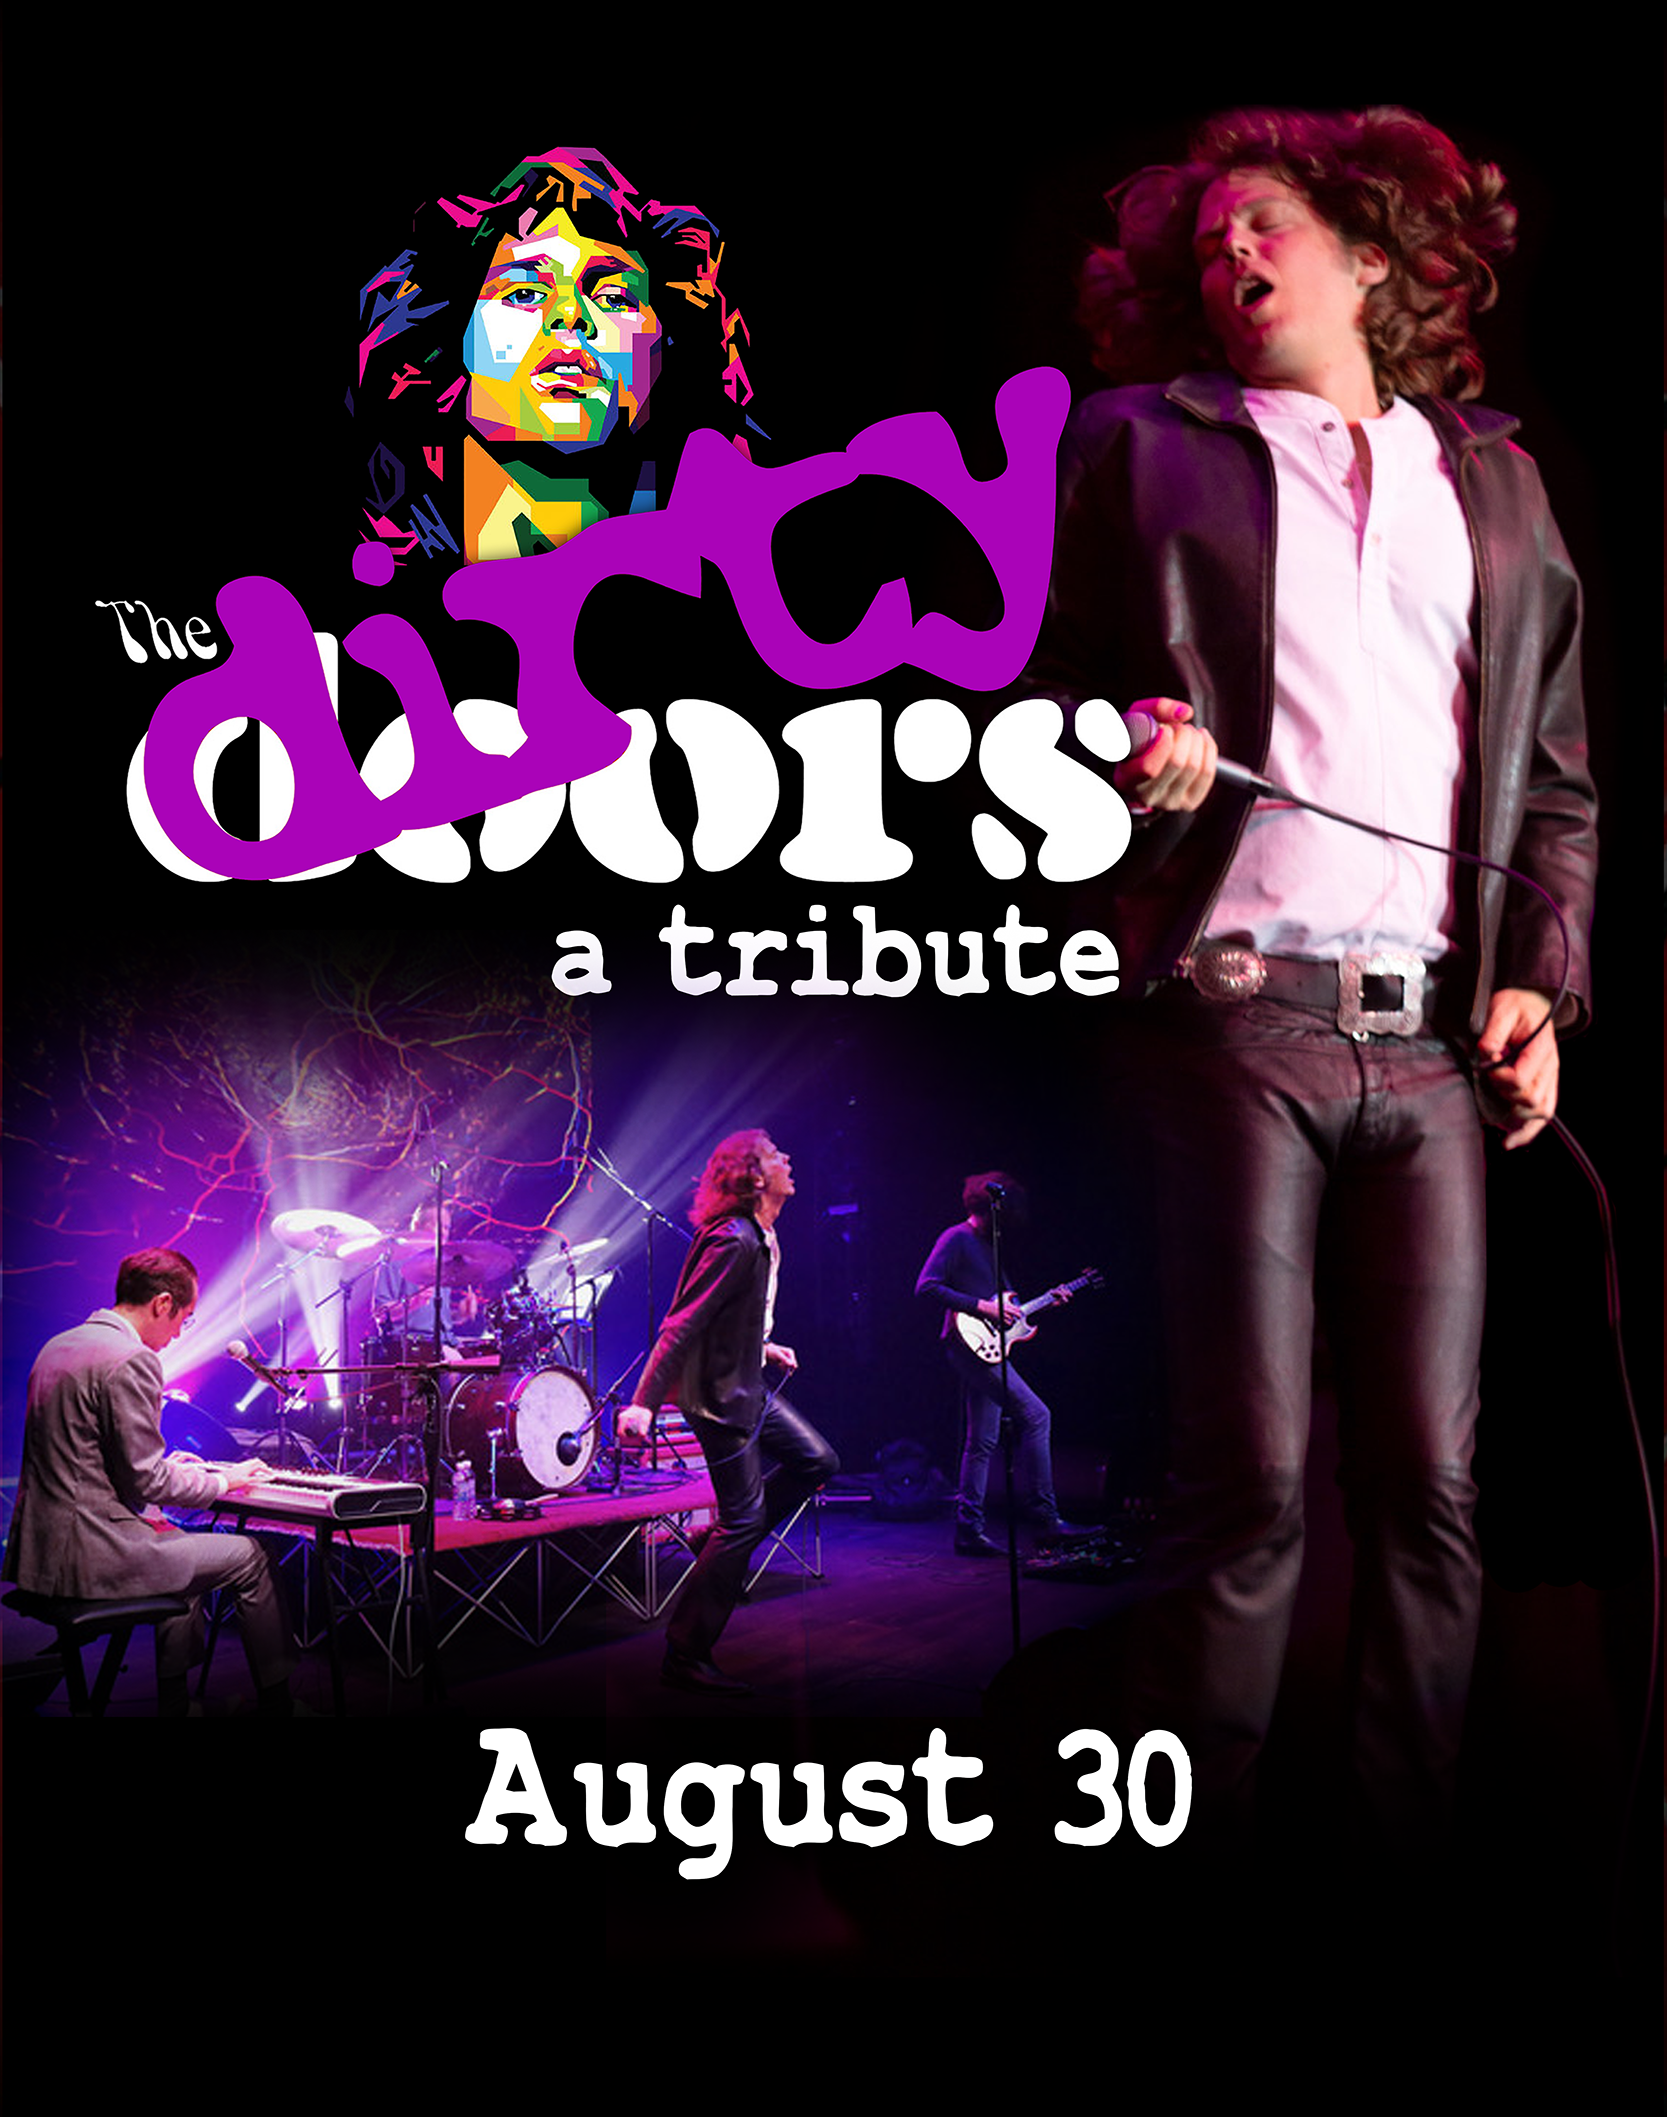 The Dirty Doors, A tribute to the music of The Doors on August 30th